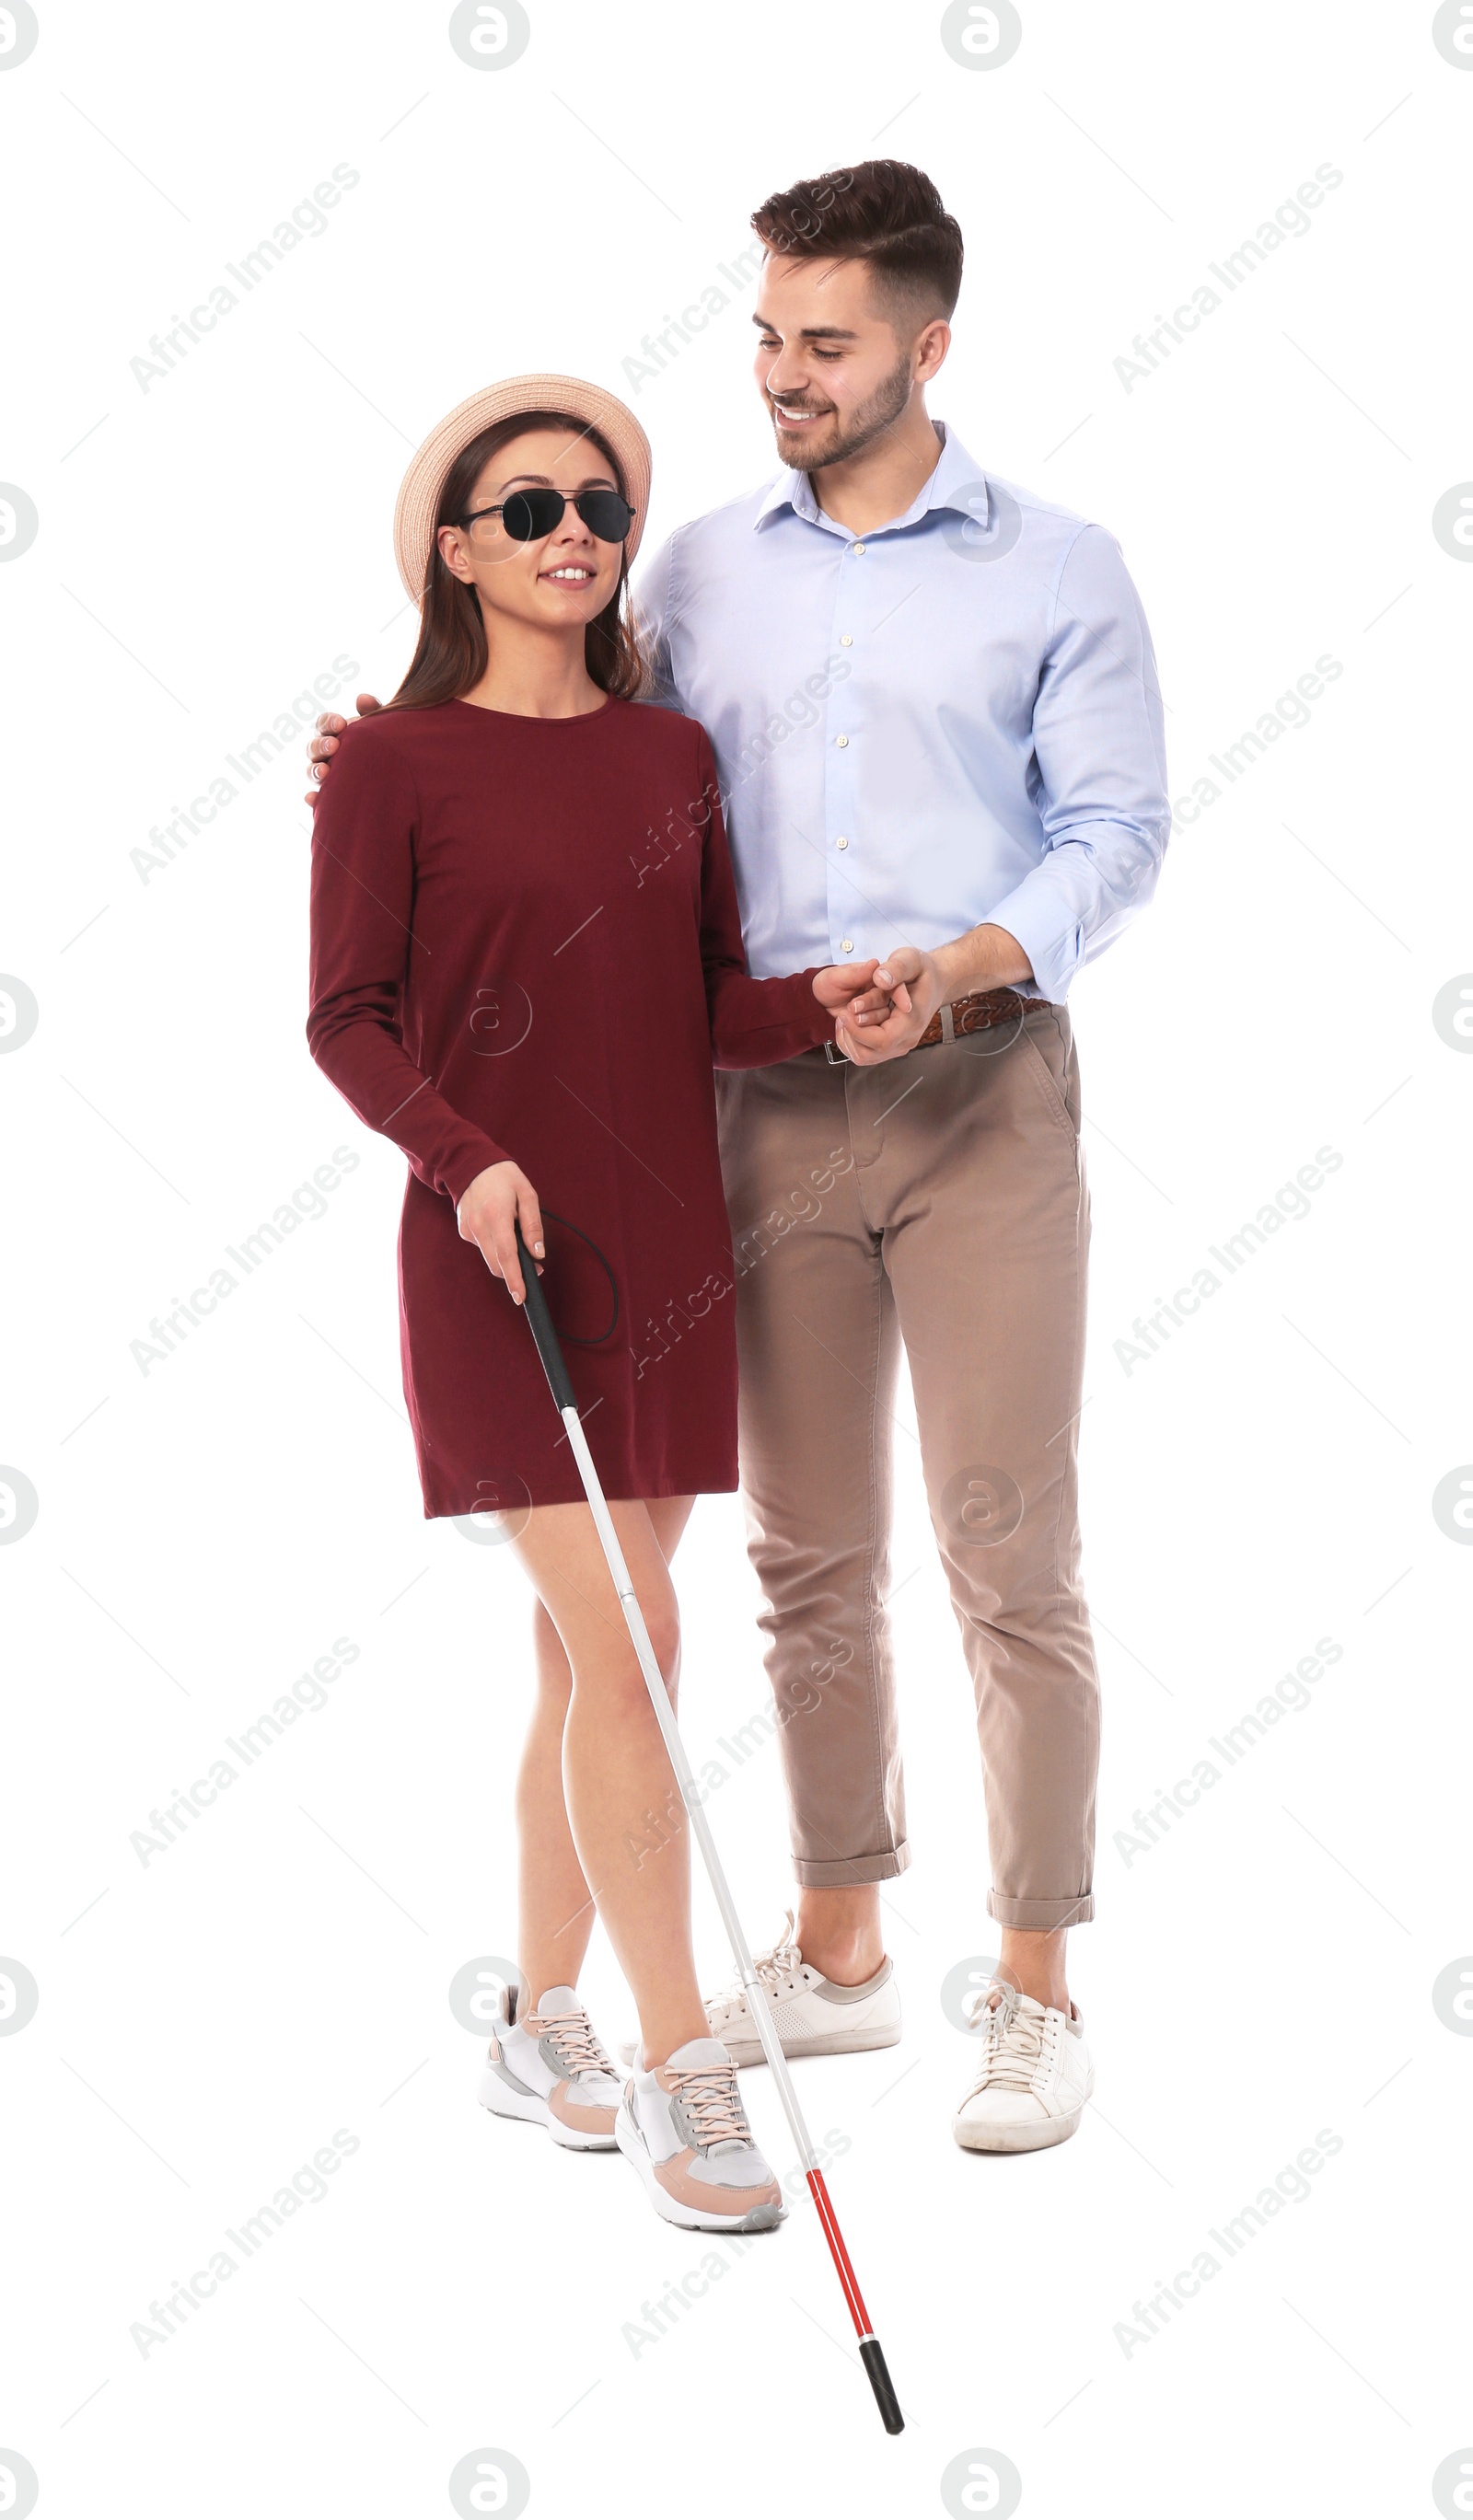 Photo of Young man helping blind person with long cane on white background